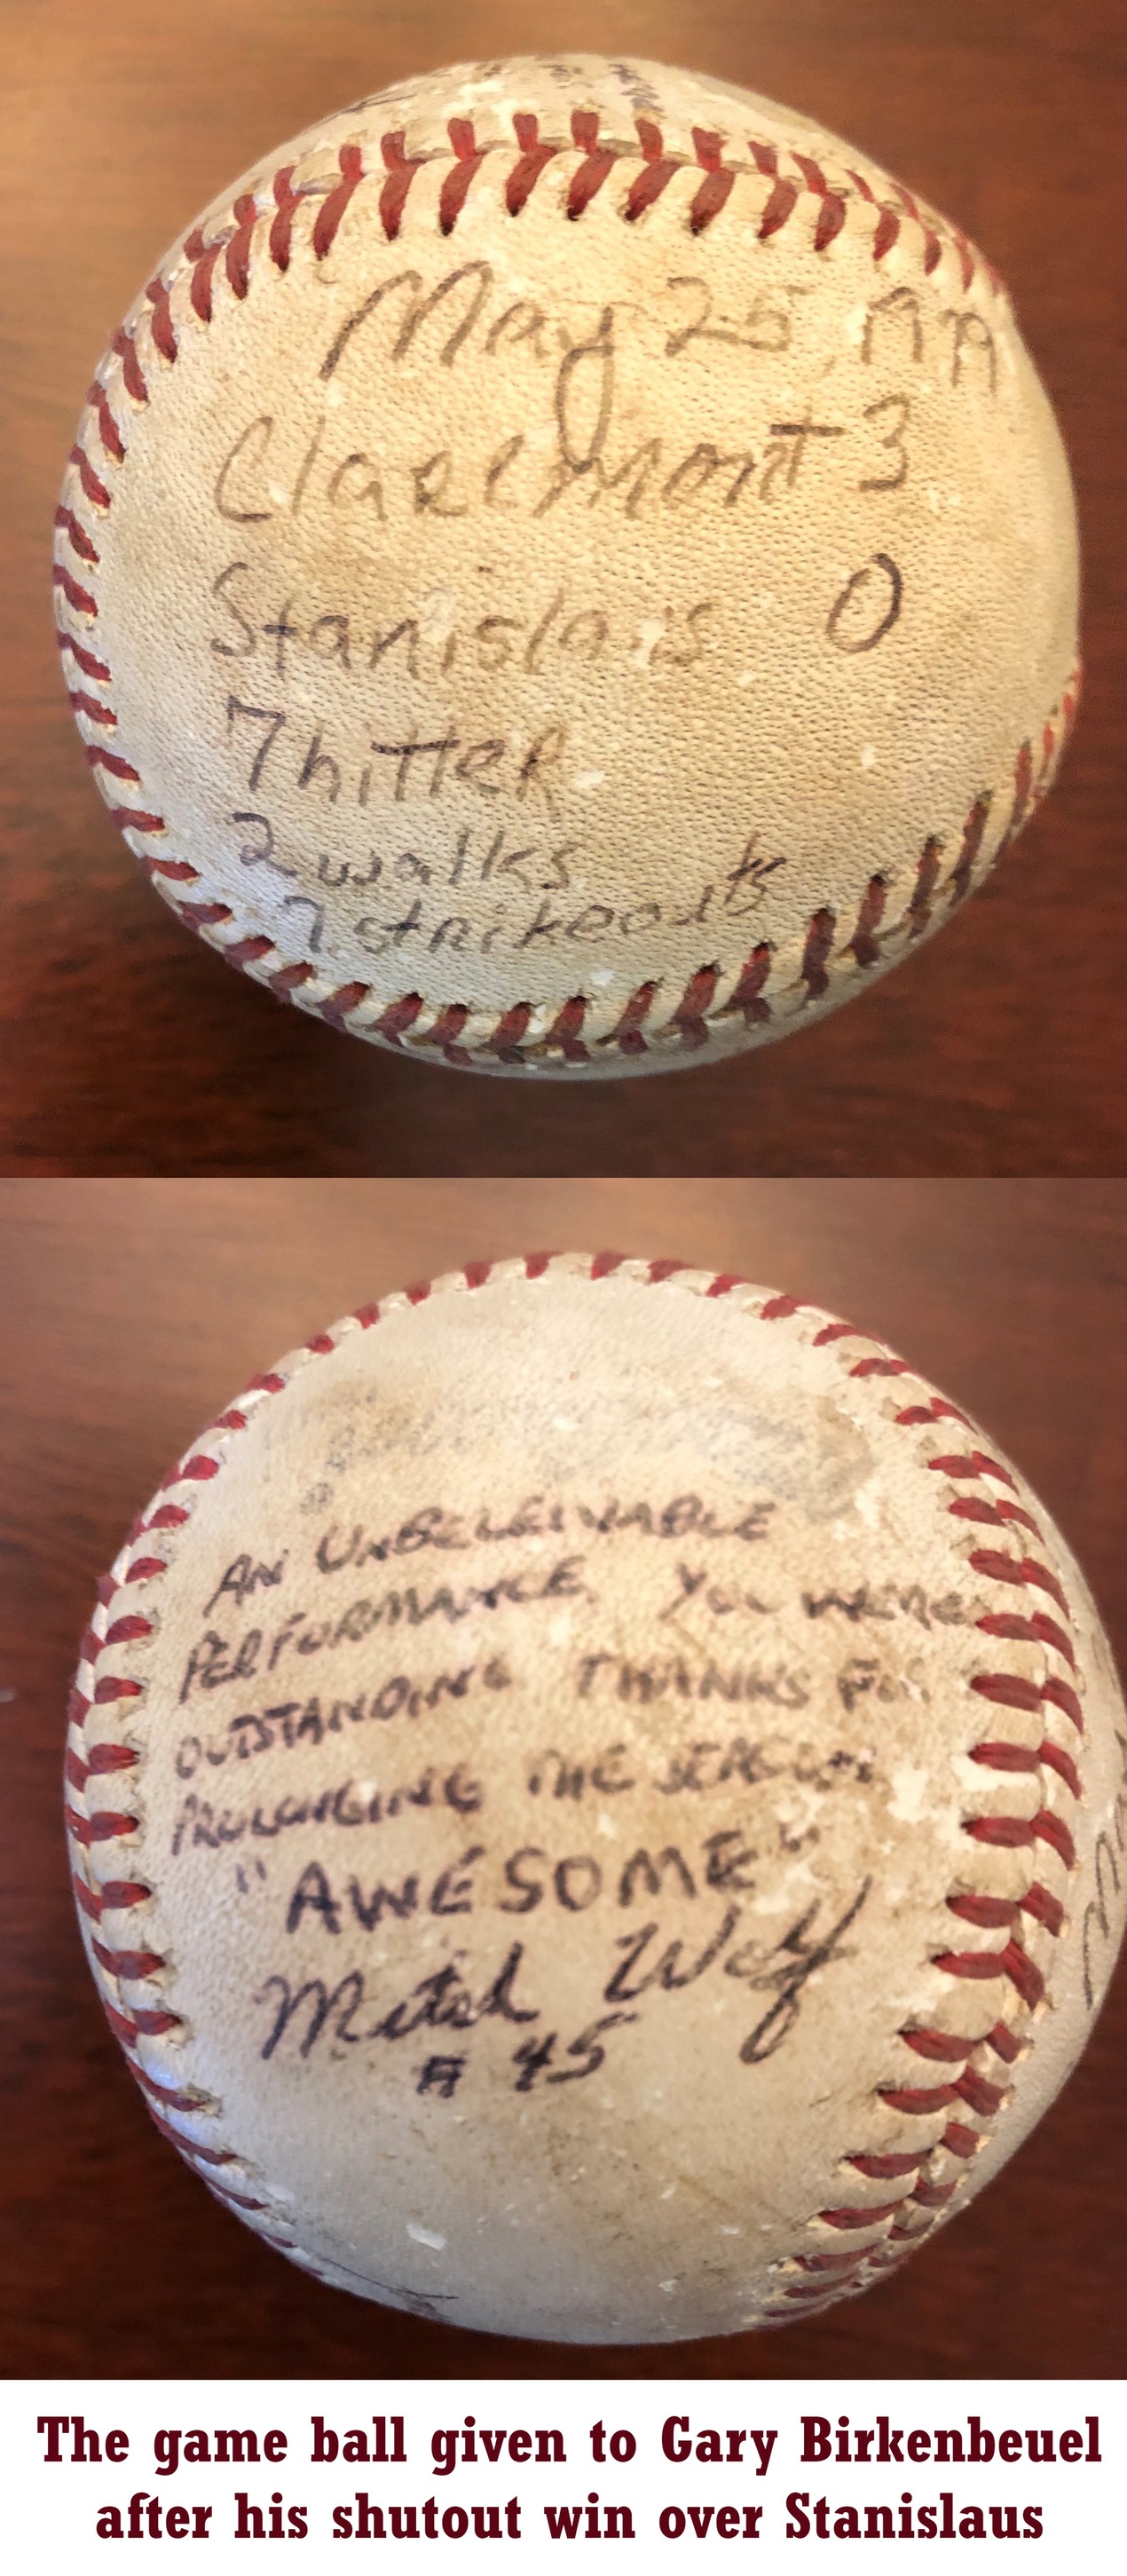 A picture of the game ball given to Gary Birkenbeuel with the date of the game printed on it: May 25, 1979. There's also a view of words written by Mitch Wolf to Gary saying: "An Unbelievable Performance. You Were Outstanding. Thanks for Prolonging the Season. Awesome. - Mitch Wolf #45"